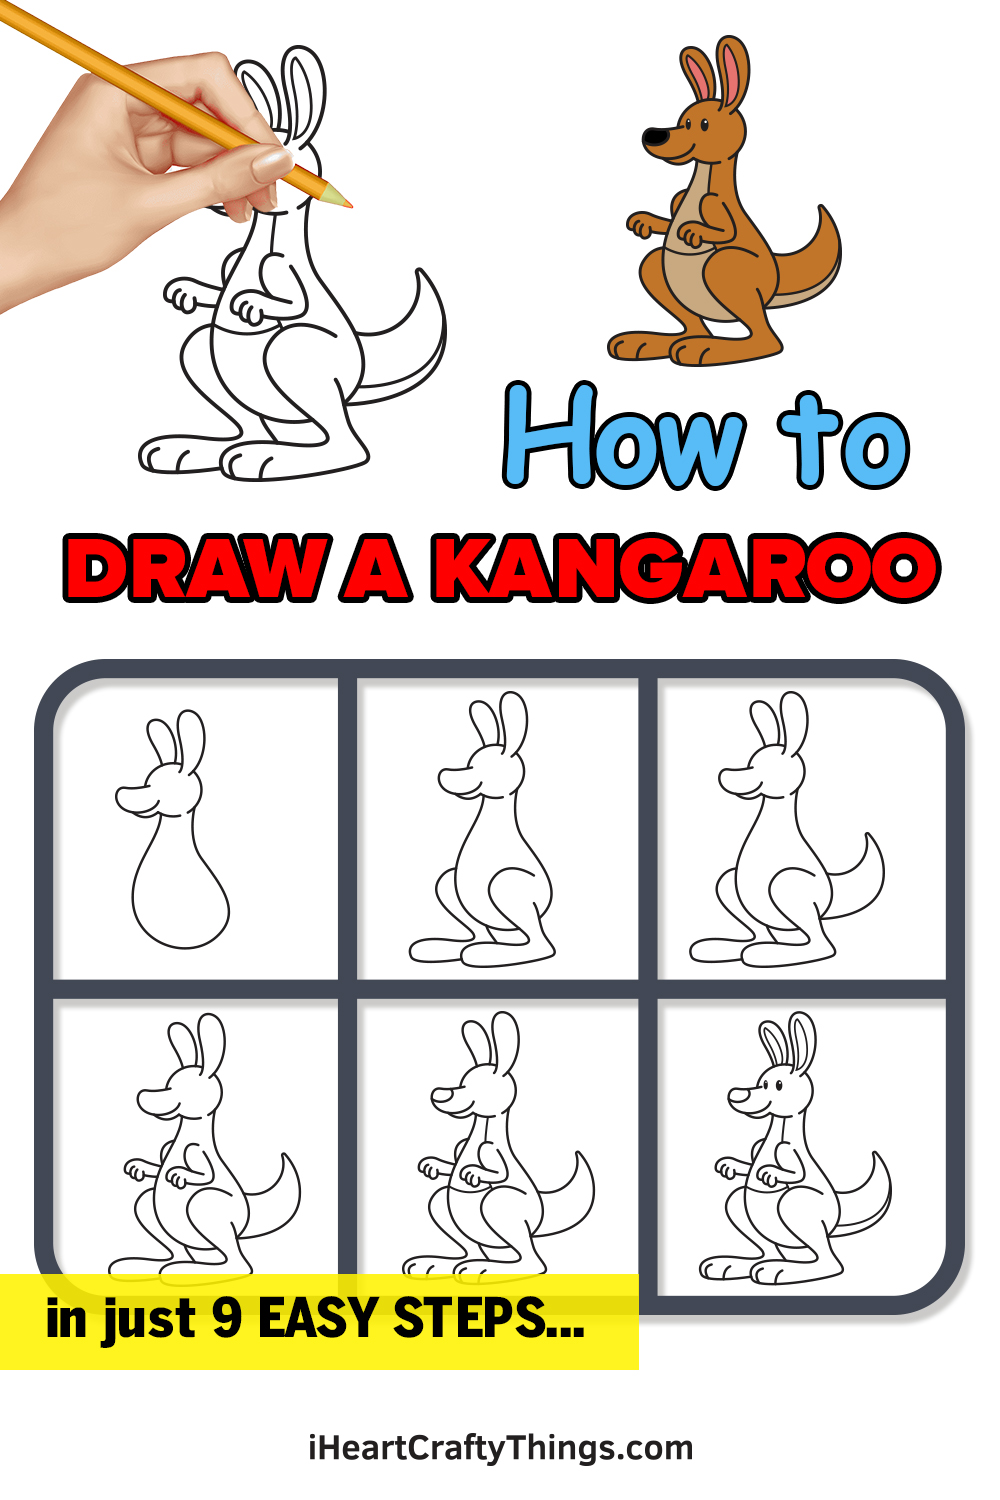 how to draw a kangaroo in 9 easy steps